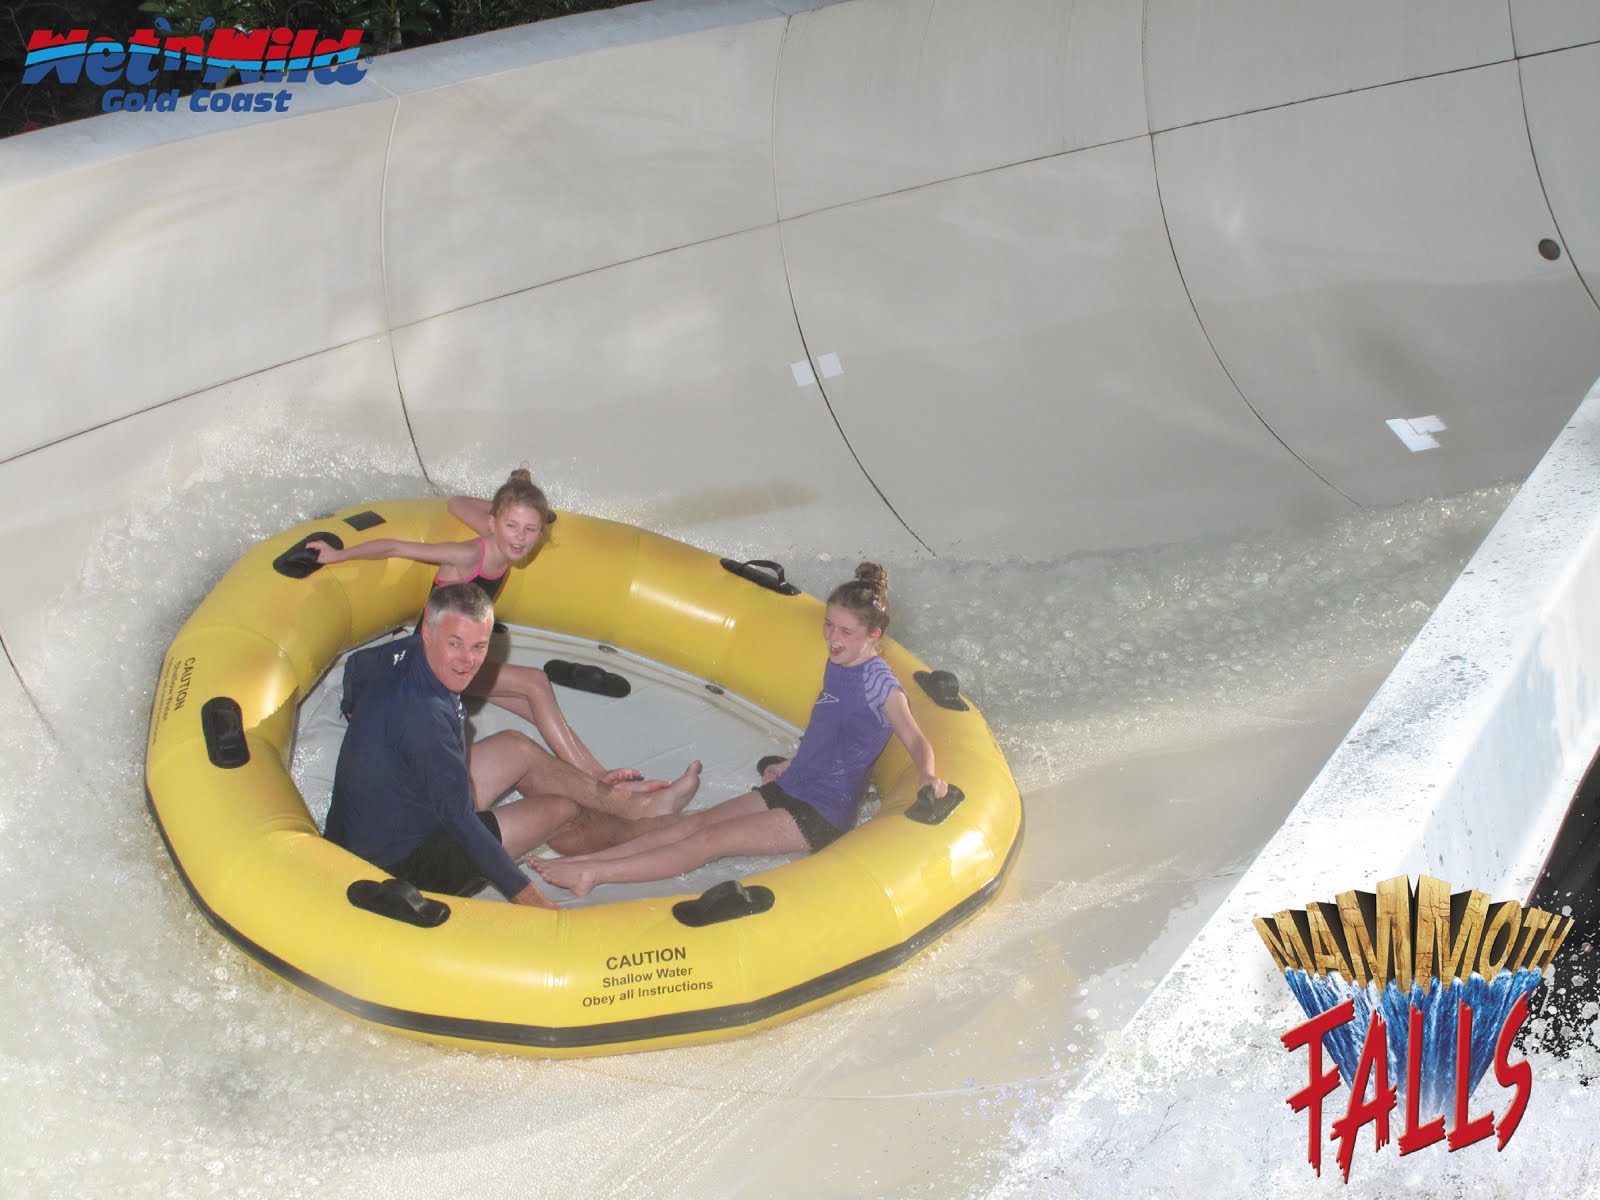 Mammoth falls ride at Wet and Wild World